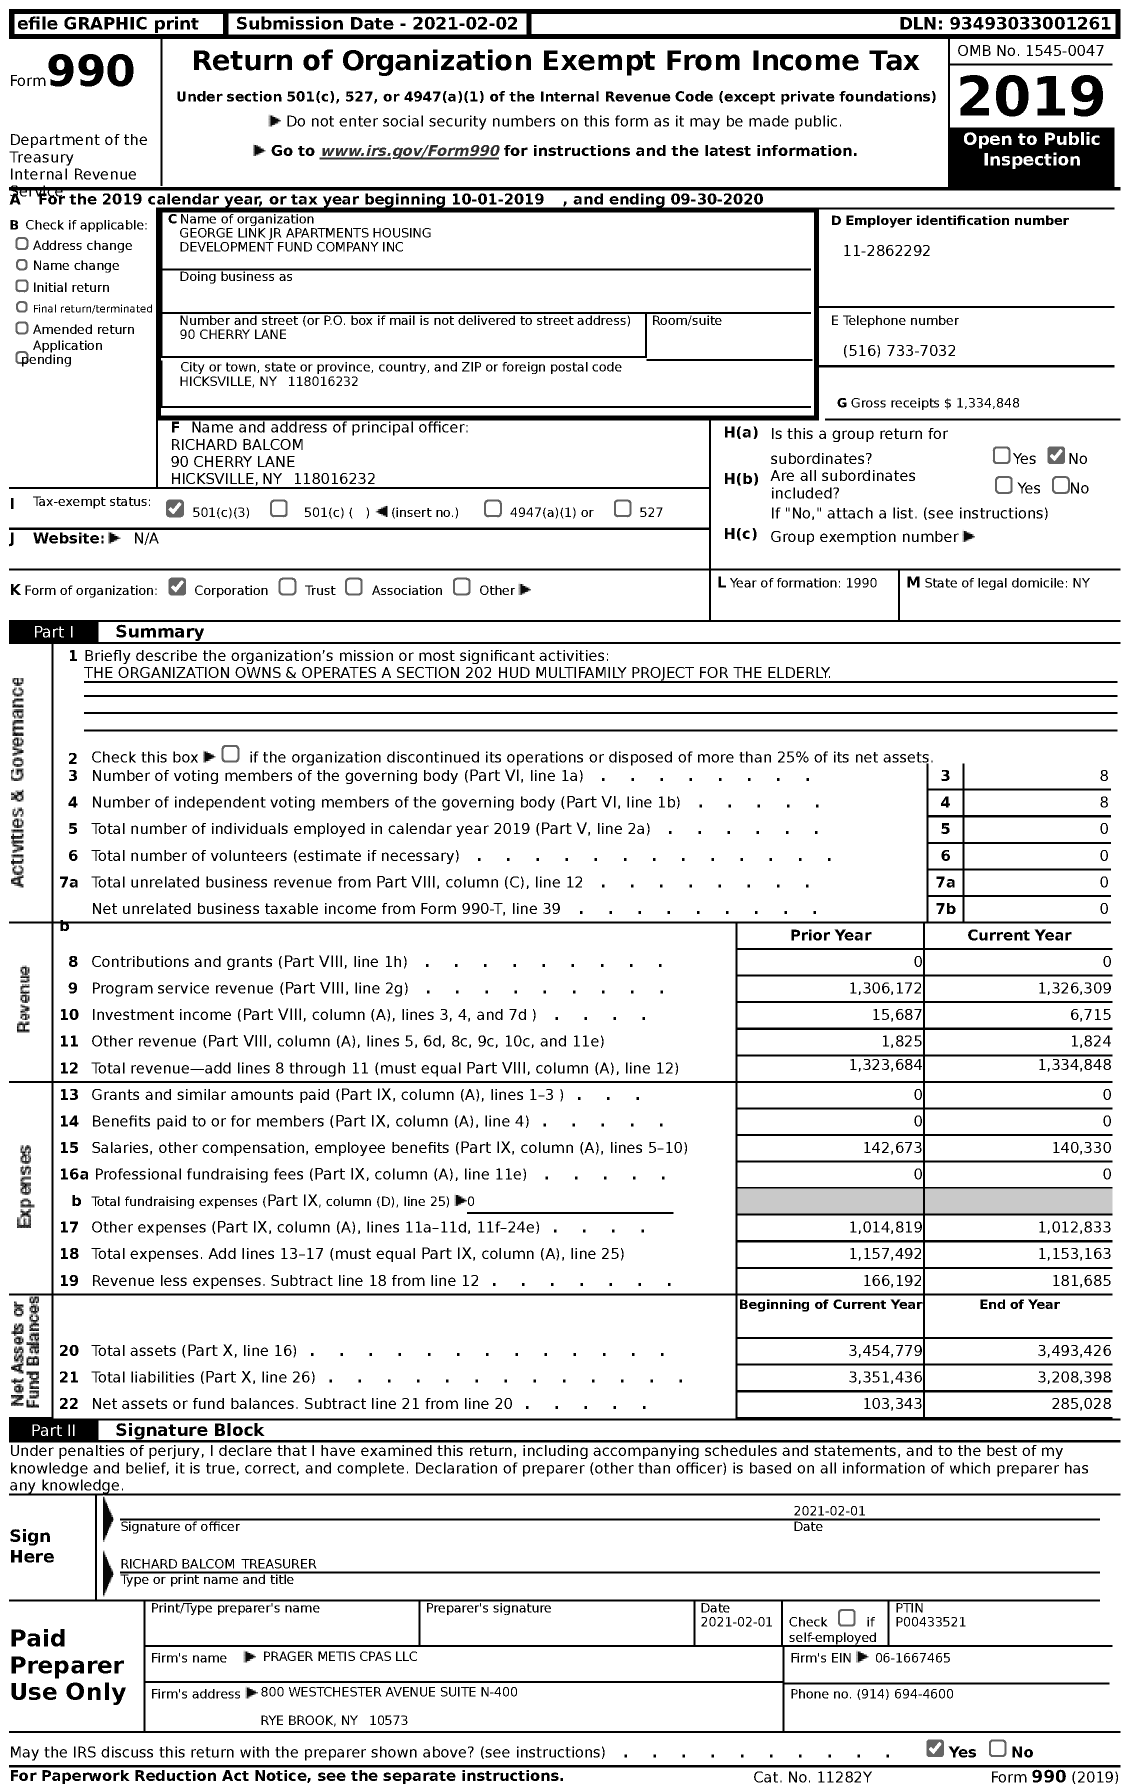 Image of first page of 2019 Form 990 for George Link JR Apartments Housing Development Fund Company